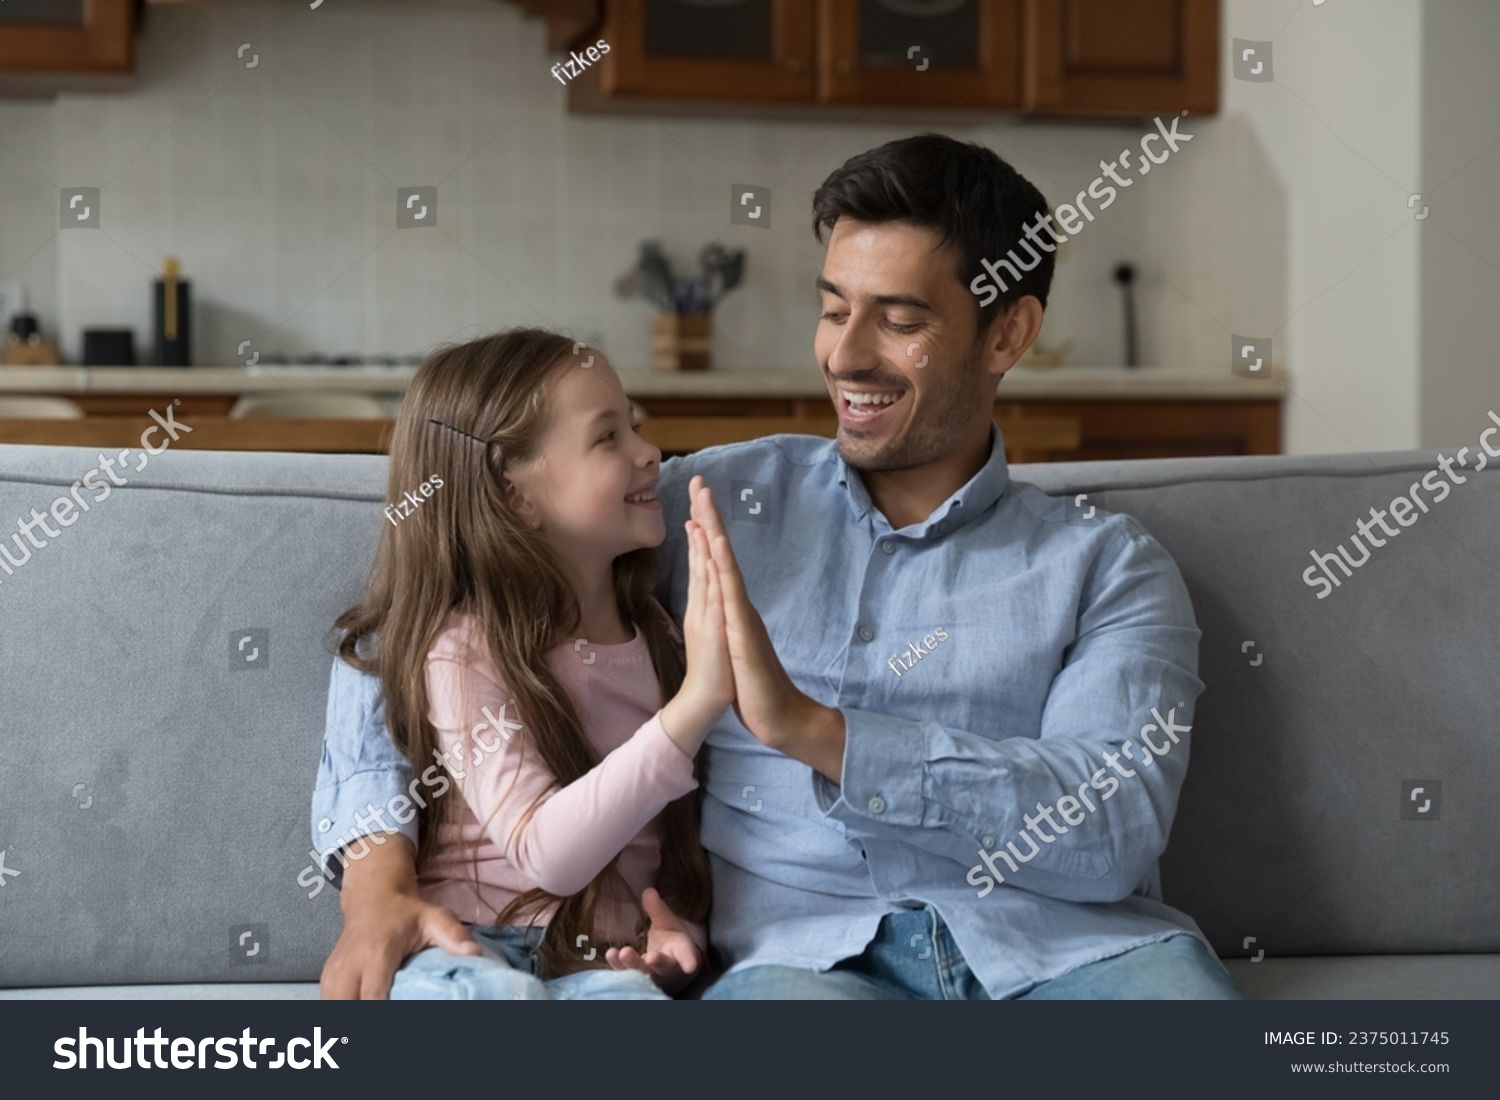 Proud kid girl and happy father giving high five on home couch, hugging, talking, laughing, enjoying leisure. Father giving praise, support to little daughter. Family, parenthood, fatherhood concept #2375011745